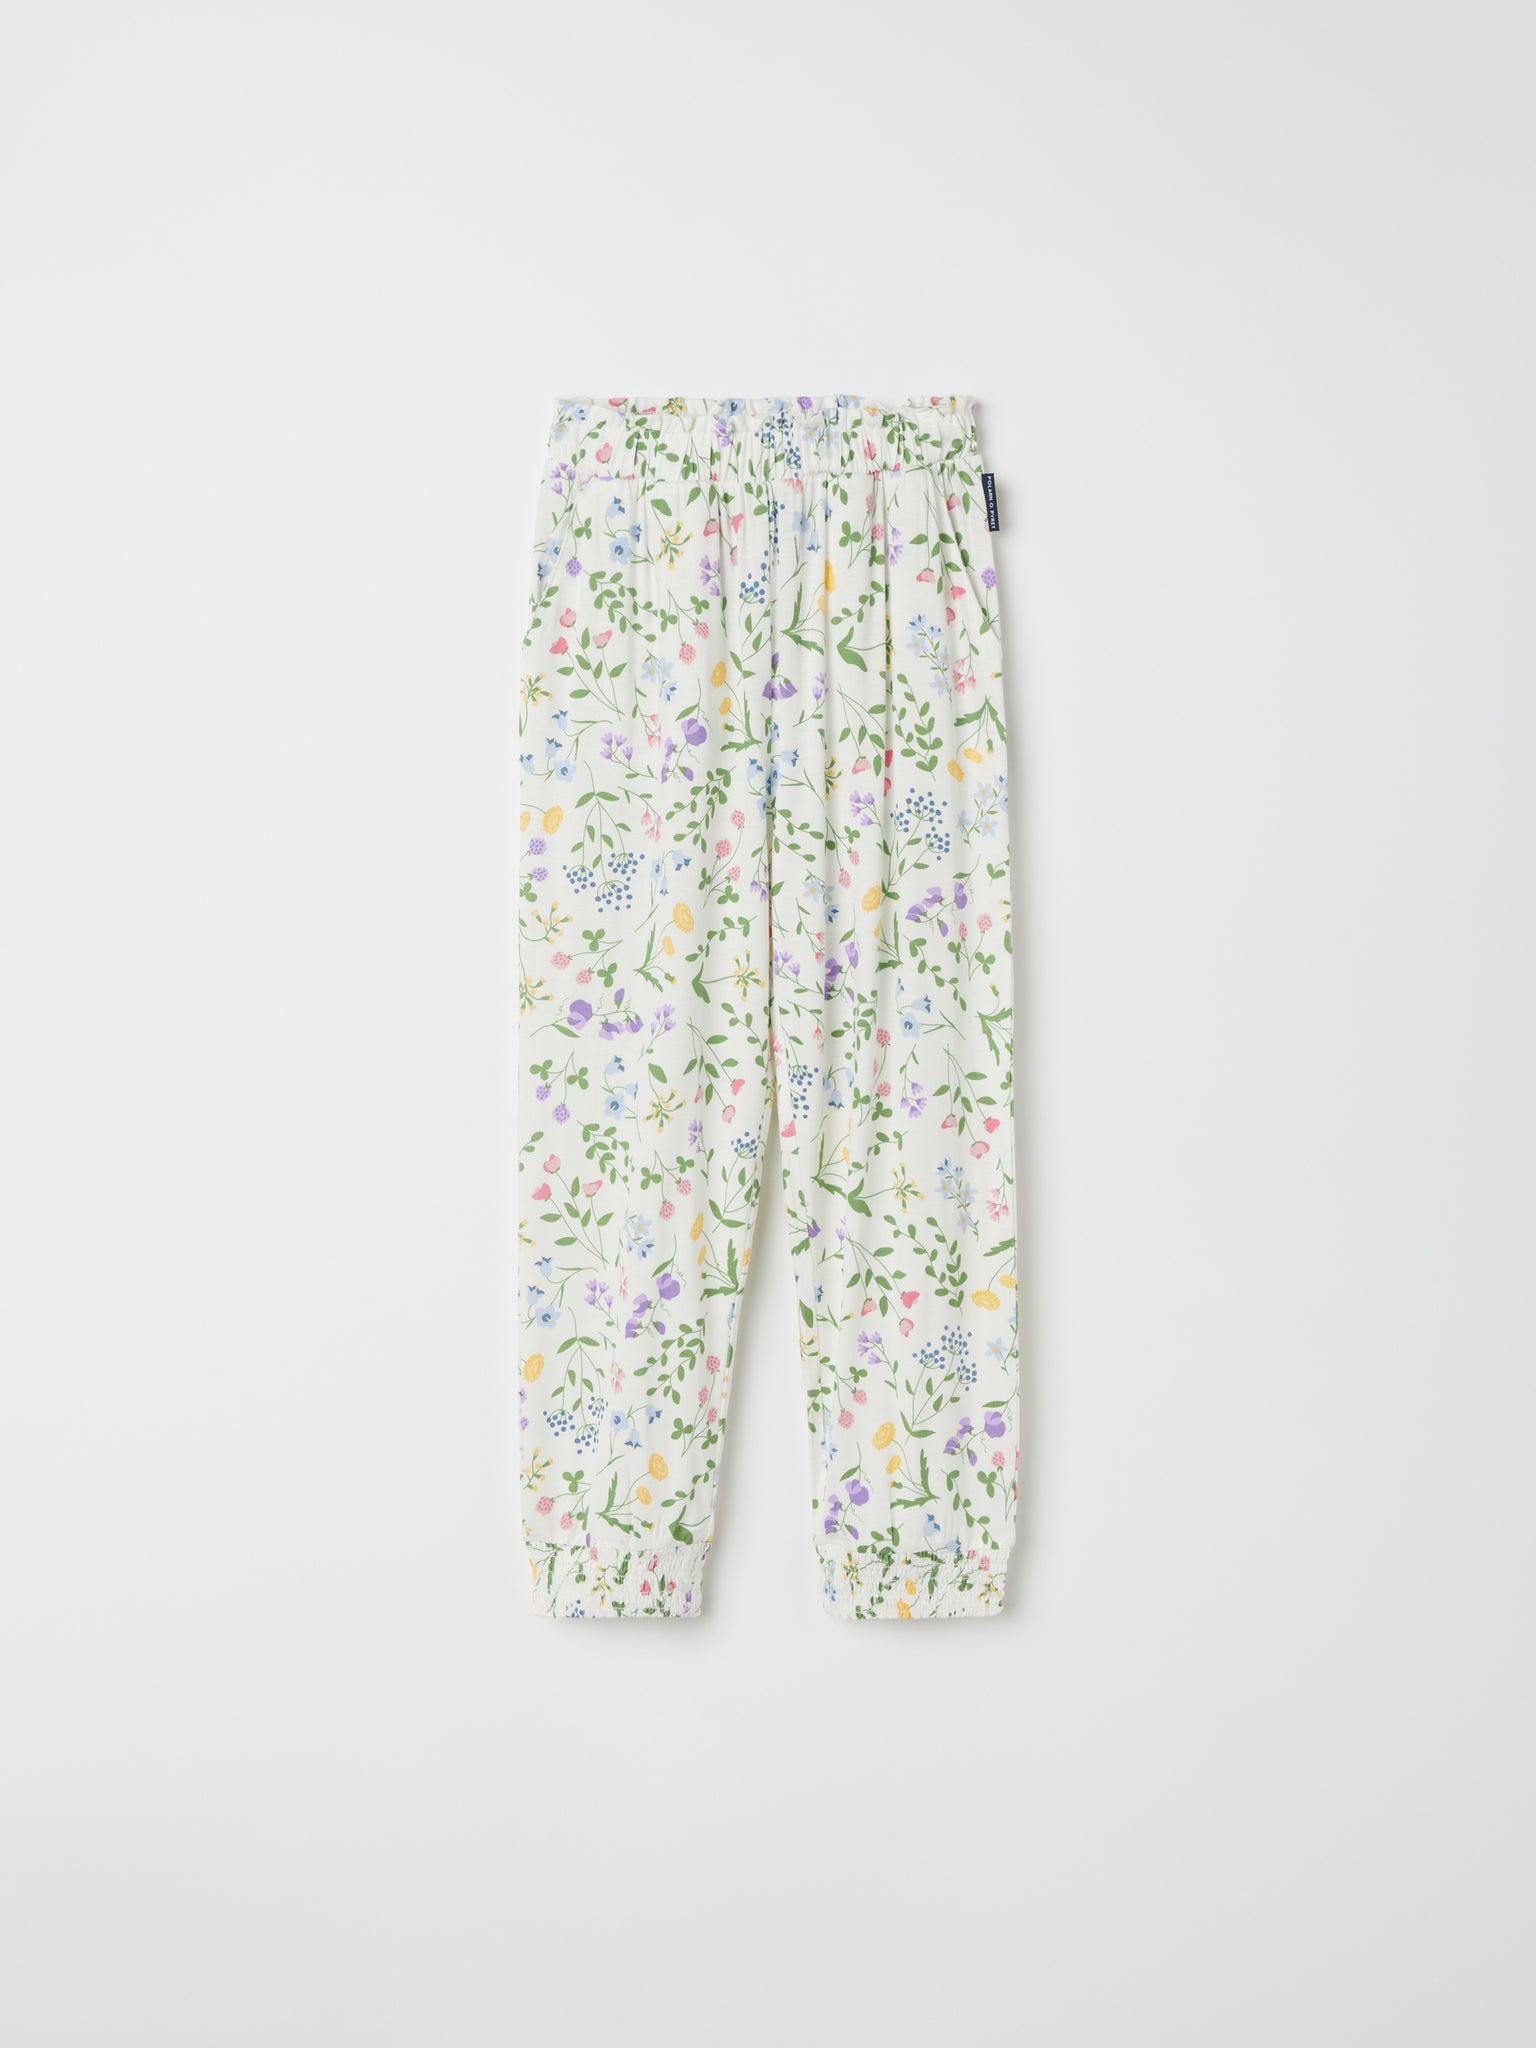 Ditsy Floral Kids Jersey Joggers from the Polarn O. Pyret kidswear collection. The best ethical kids clothes